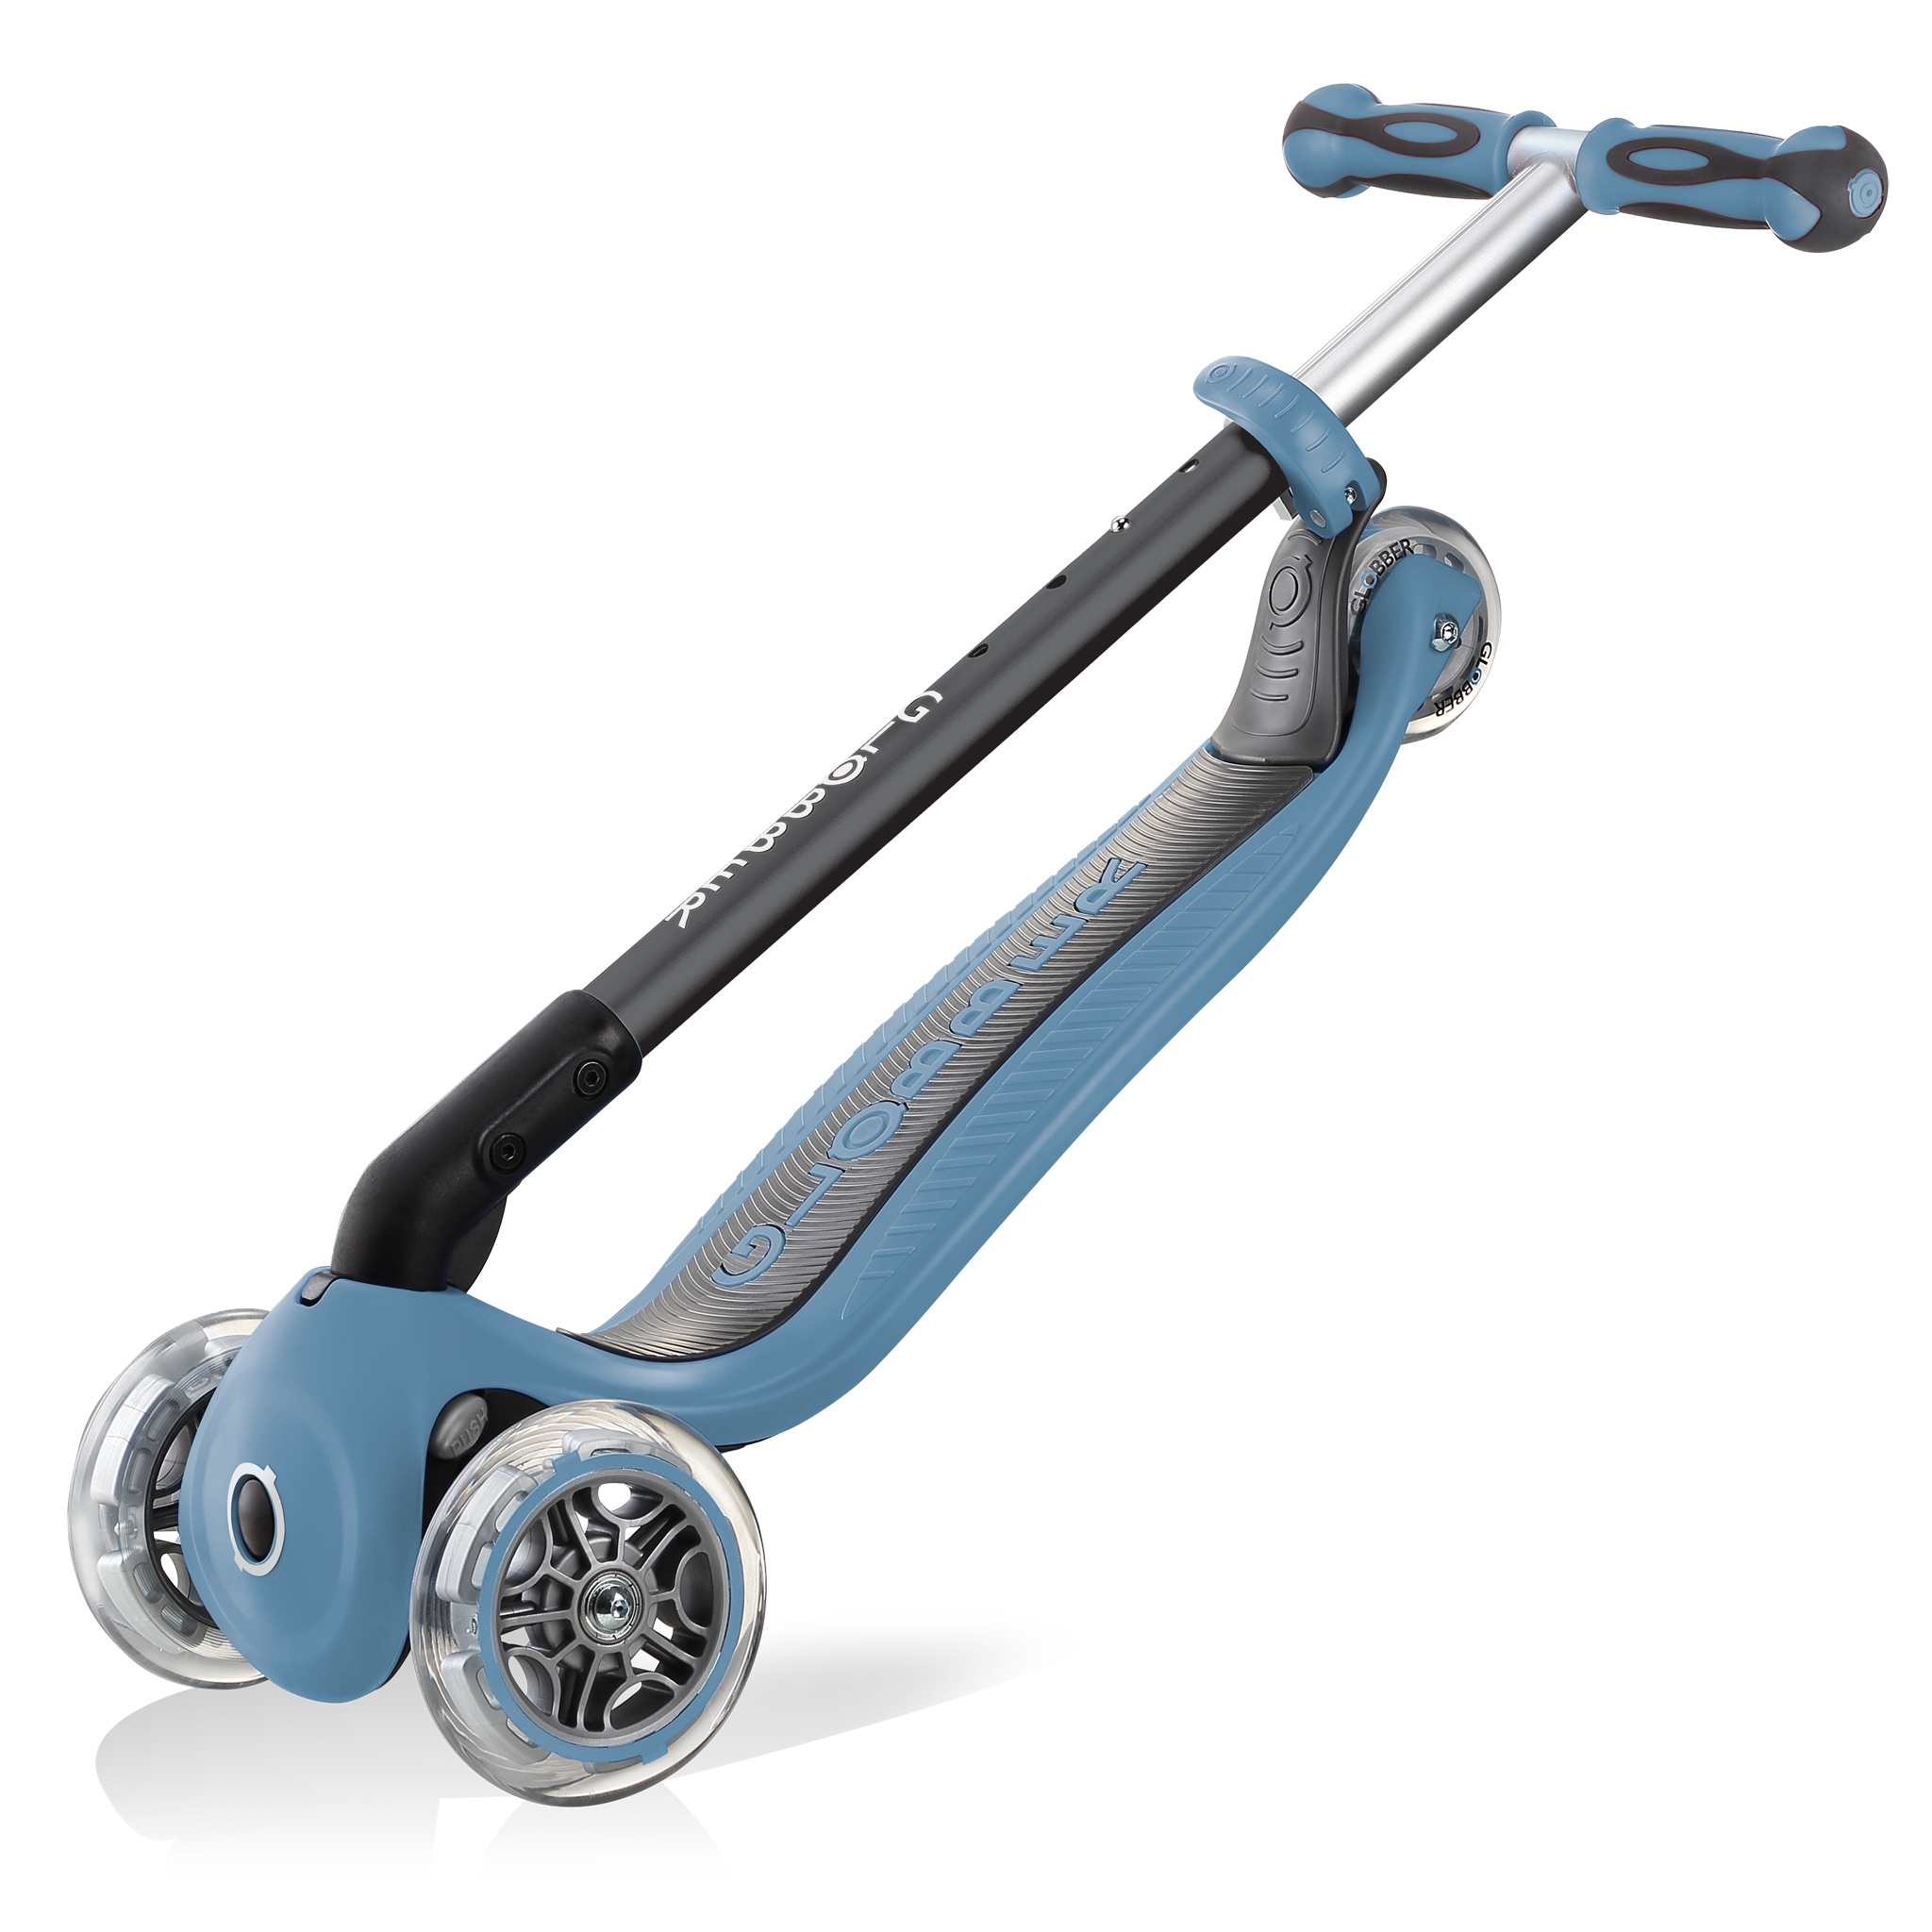 GO-UP-DELUXE-ride-on-walking-bike-scooter-trolley-mode-compatible-ash-blue 5